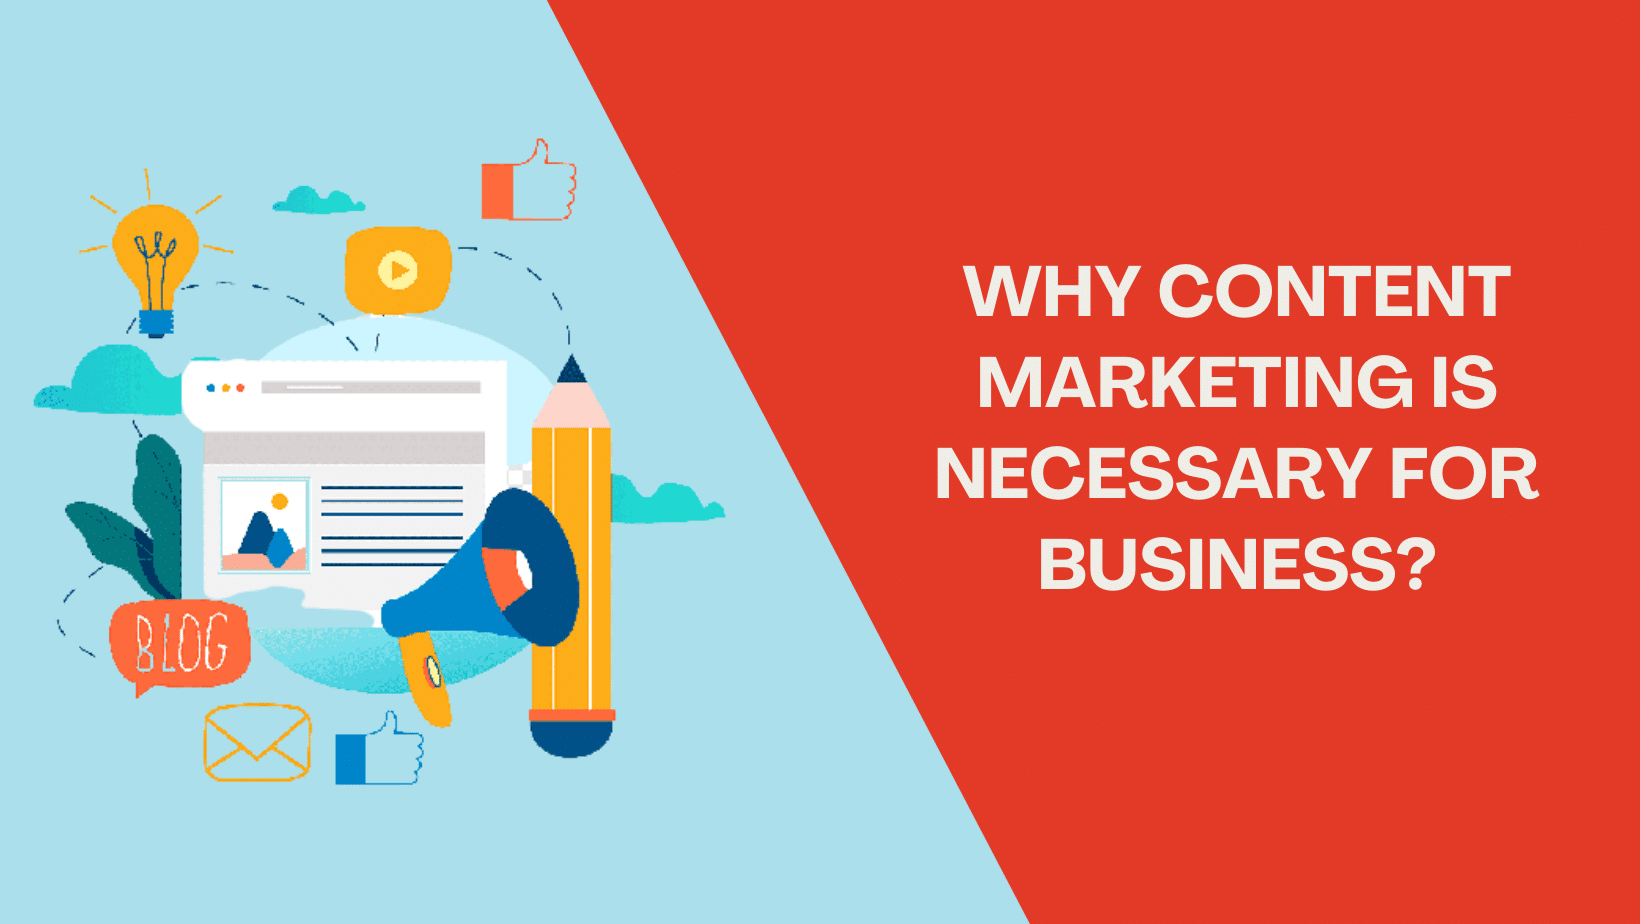 Find out Why Content Marketing is necessary for business